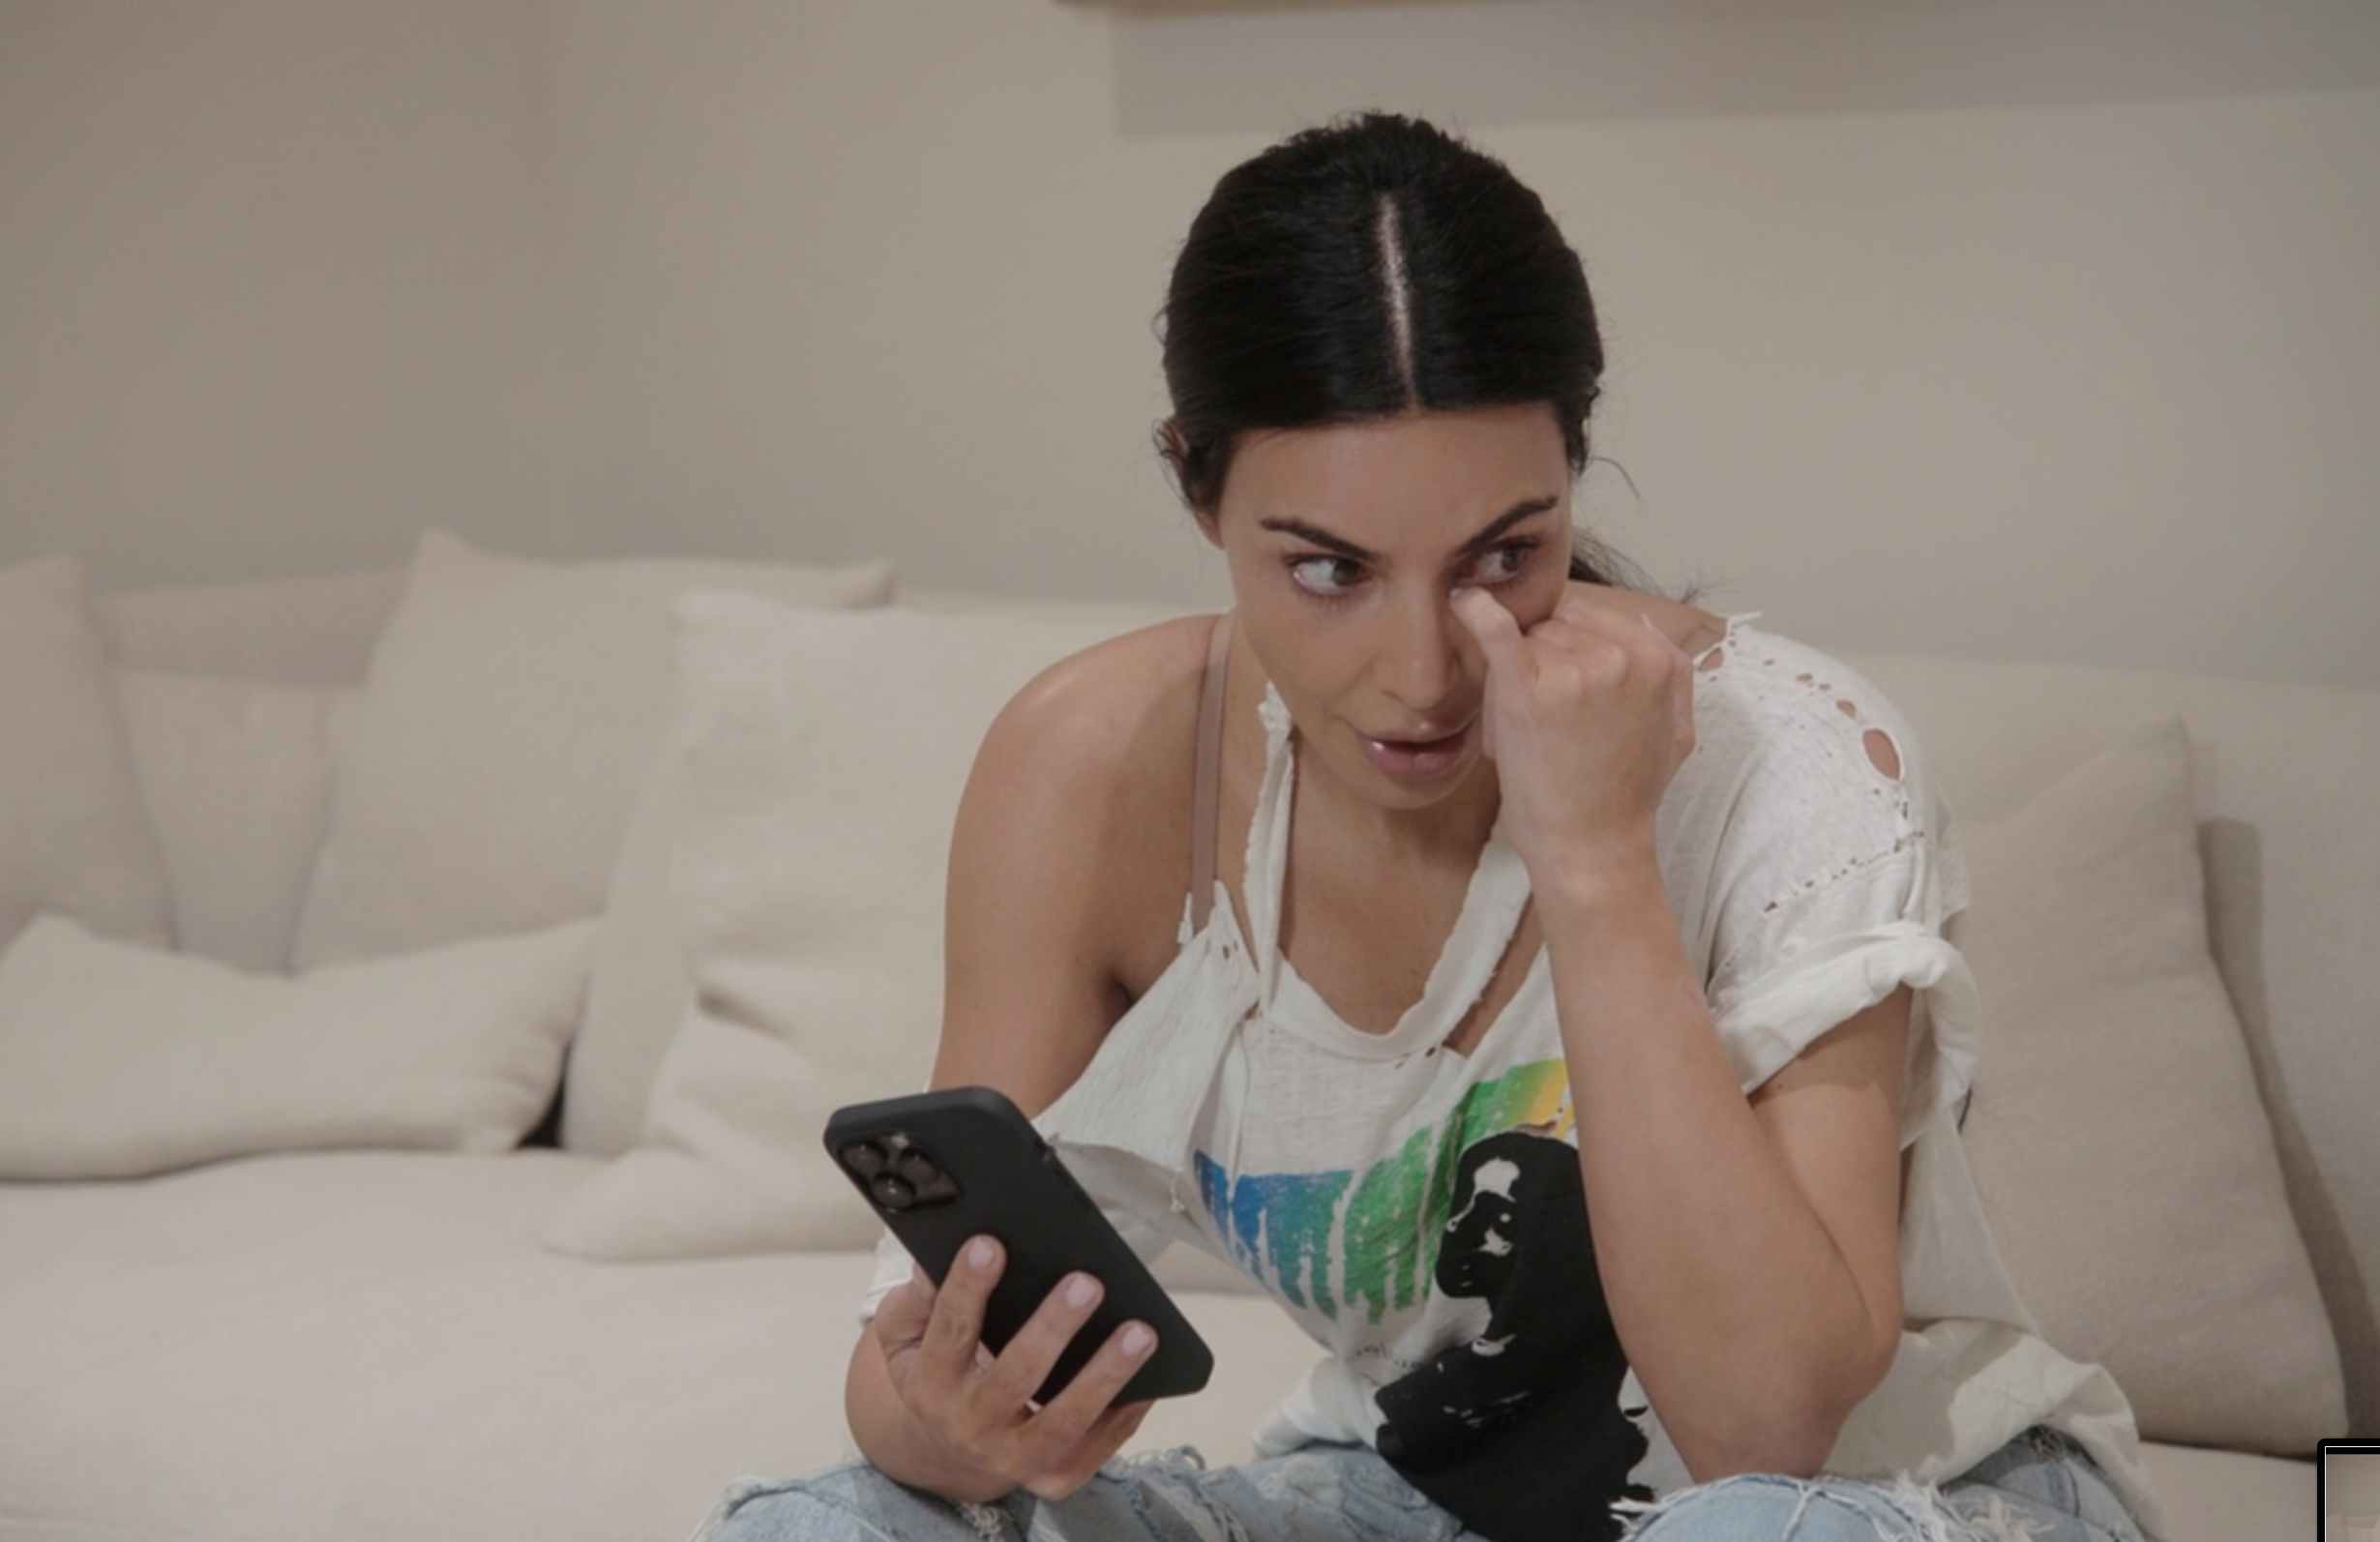 Kim sitting on a couch and holding a phone